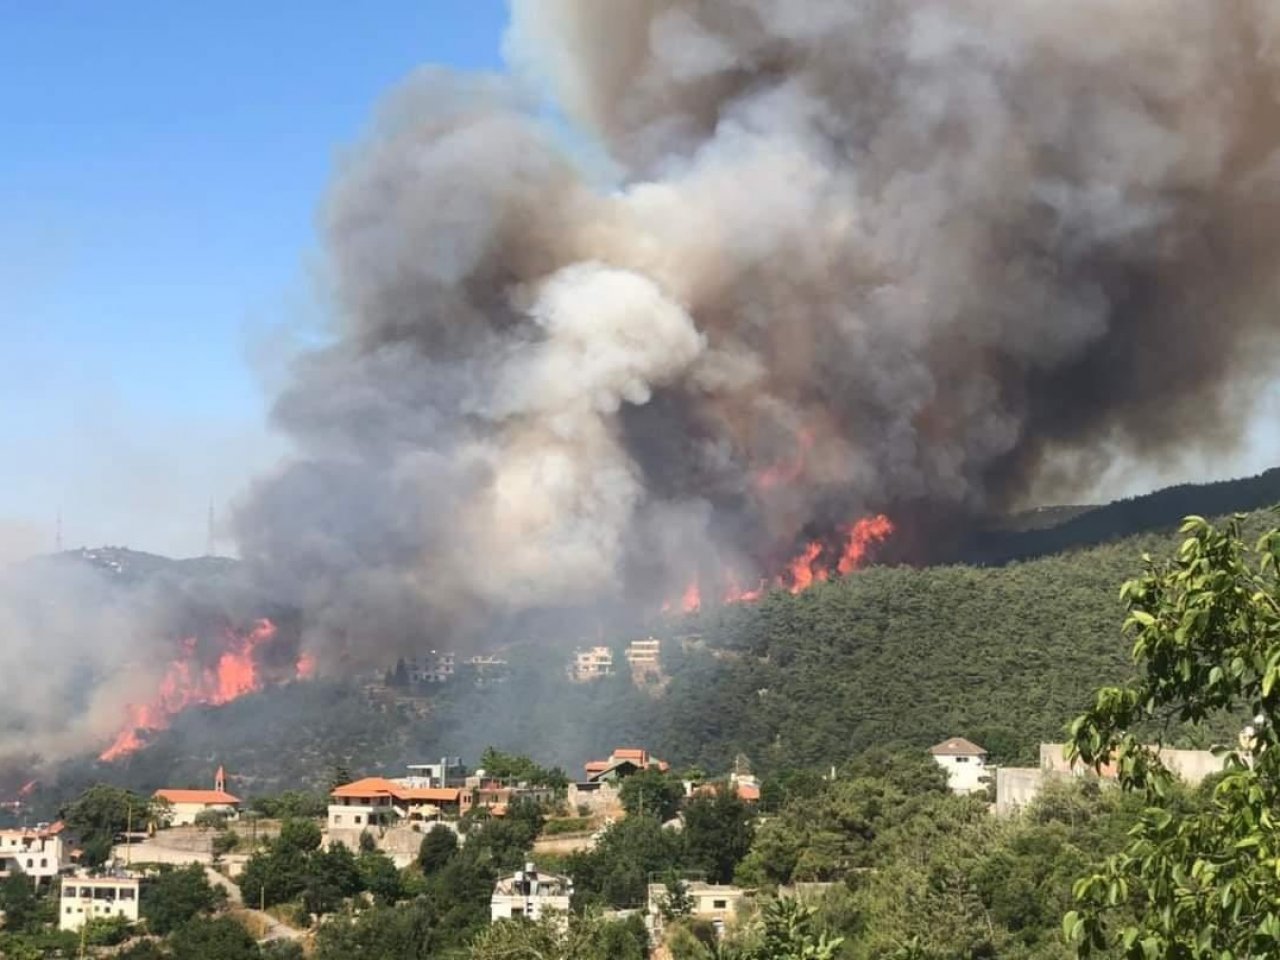 The Middle East fights wildfires: Turkey and Lebanon fight blazes as deaths reported